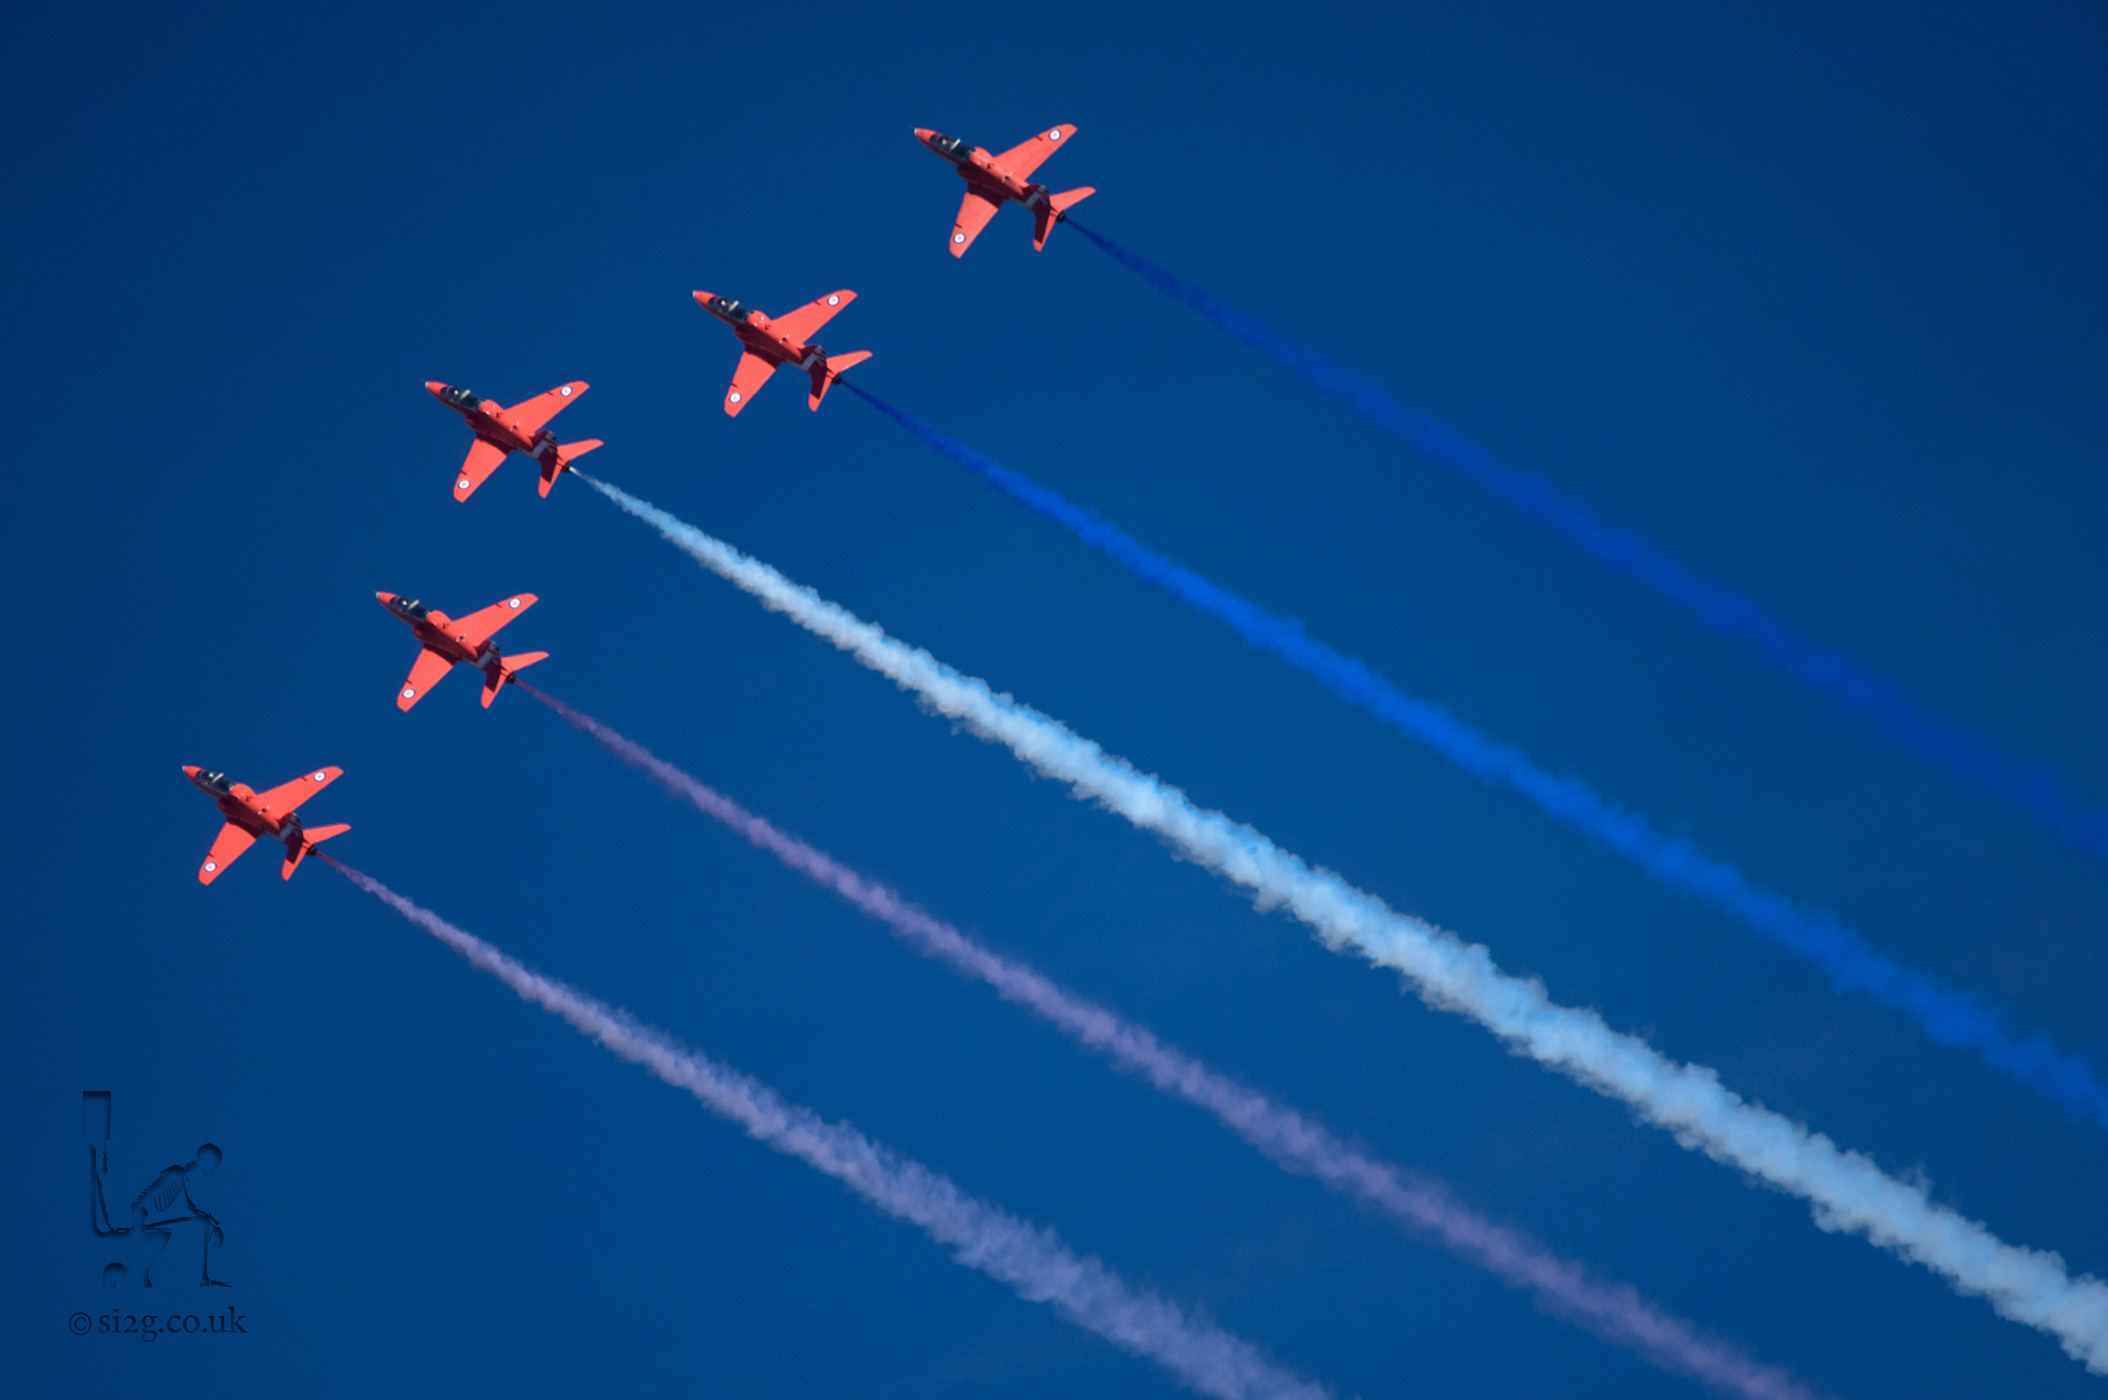 Wales National Air Show - The Red Arrows always seam to steal the show, with their trails of coloured smoke and daredevil manoeuvres.  On this particular day the weather was clear and the sky was blue, allowing for crisp shots like this one.